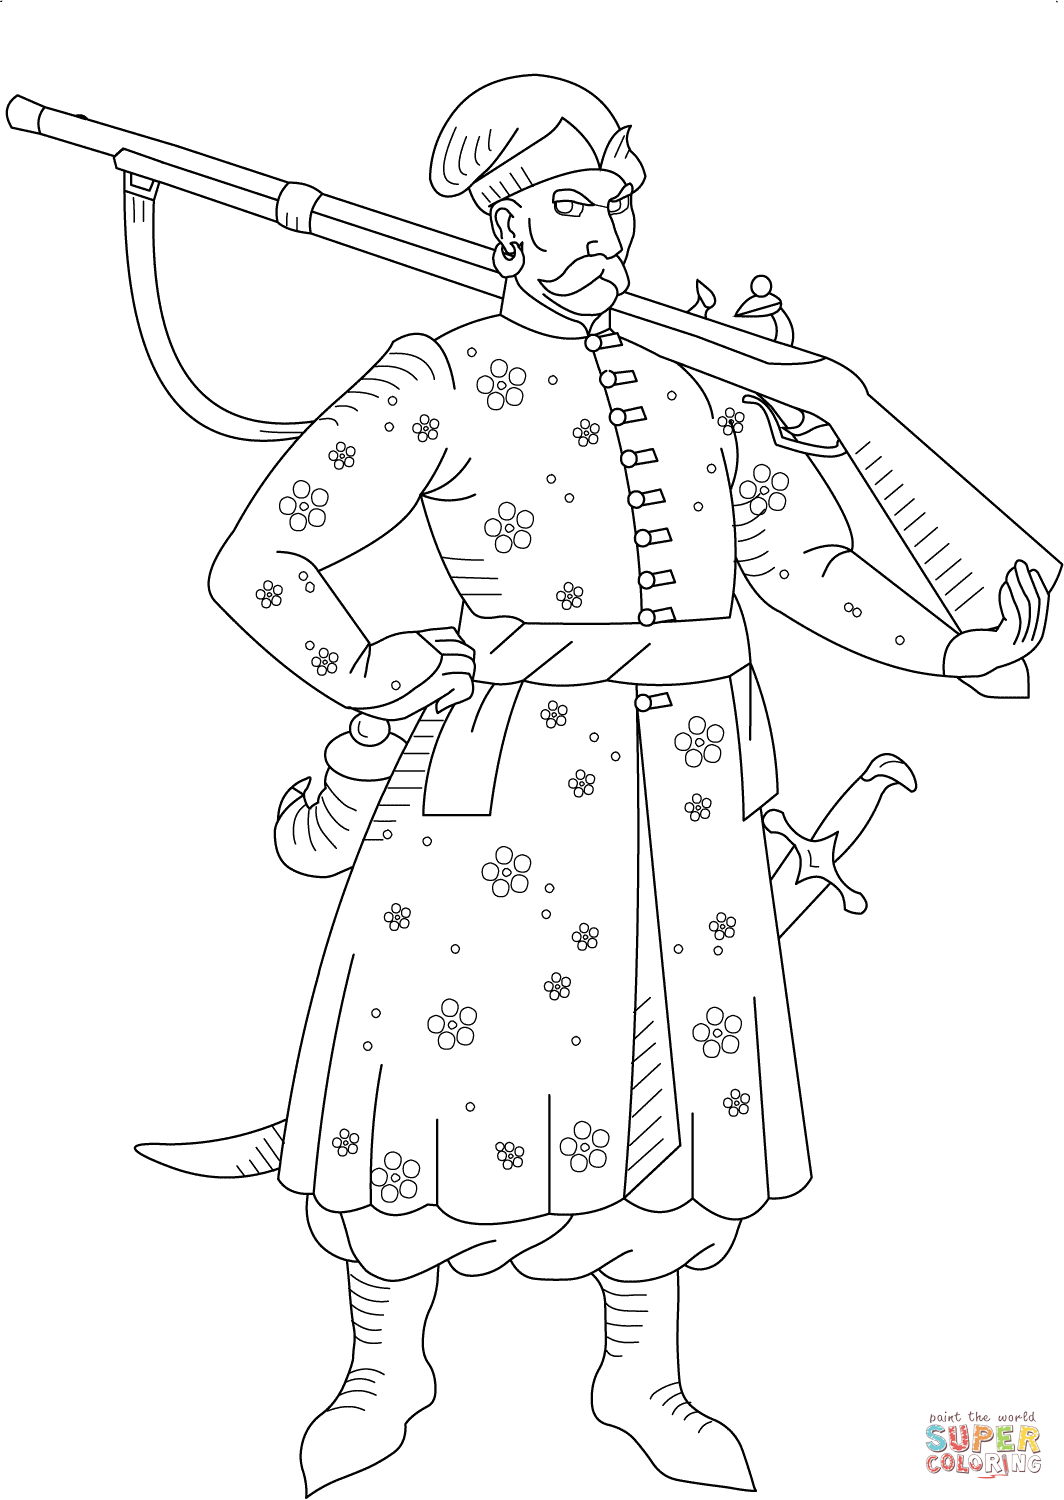 Ukrainian Cossack coloring page | Free Printable Coloring Pages